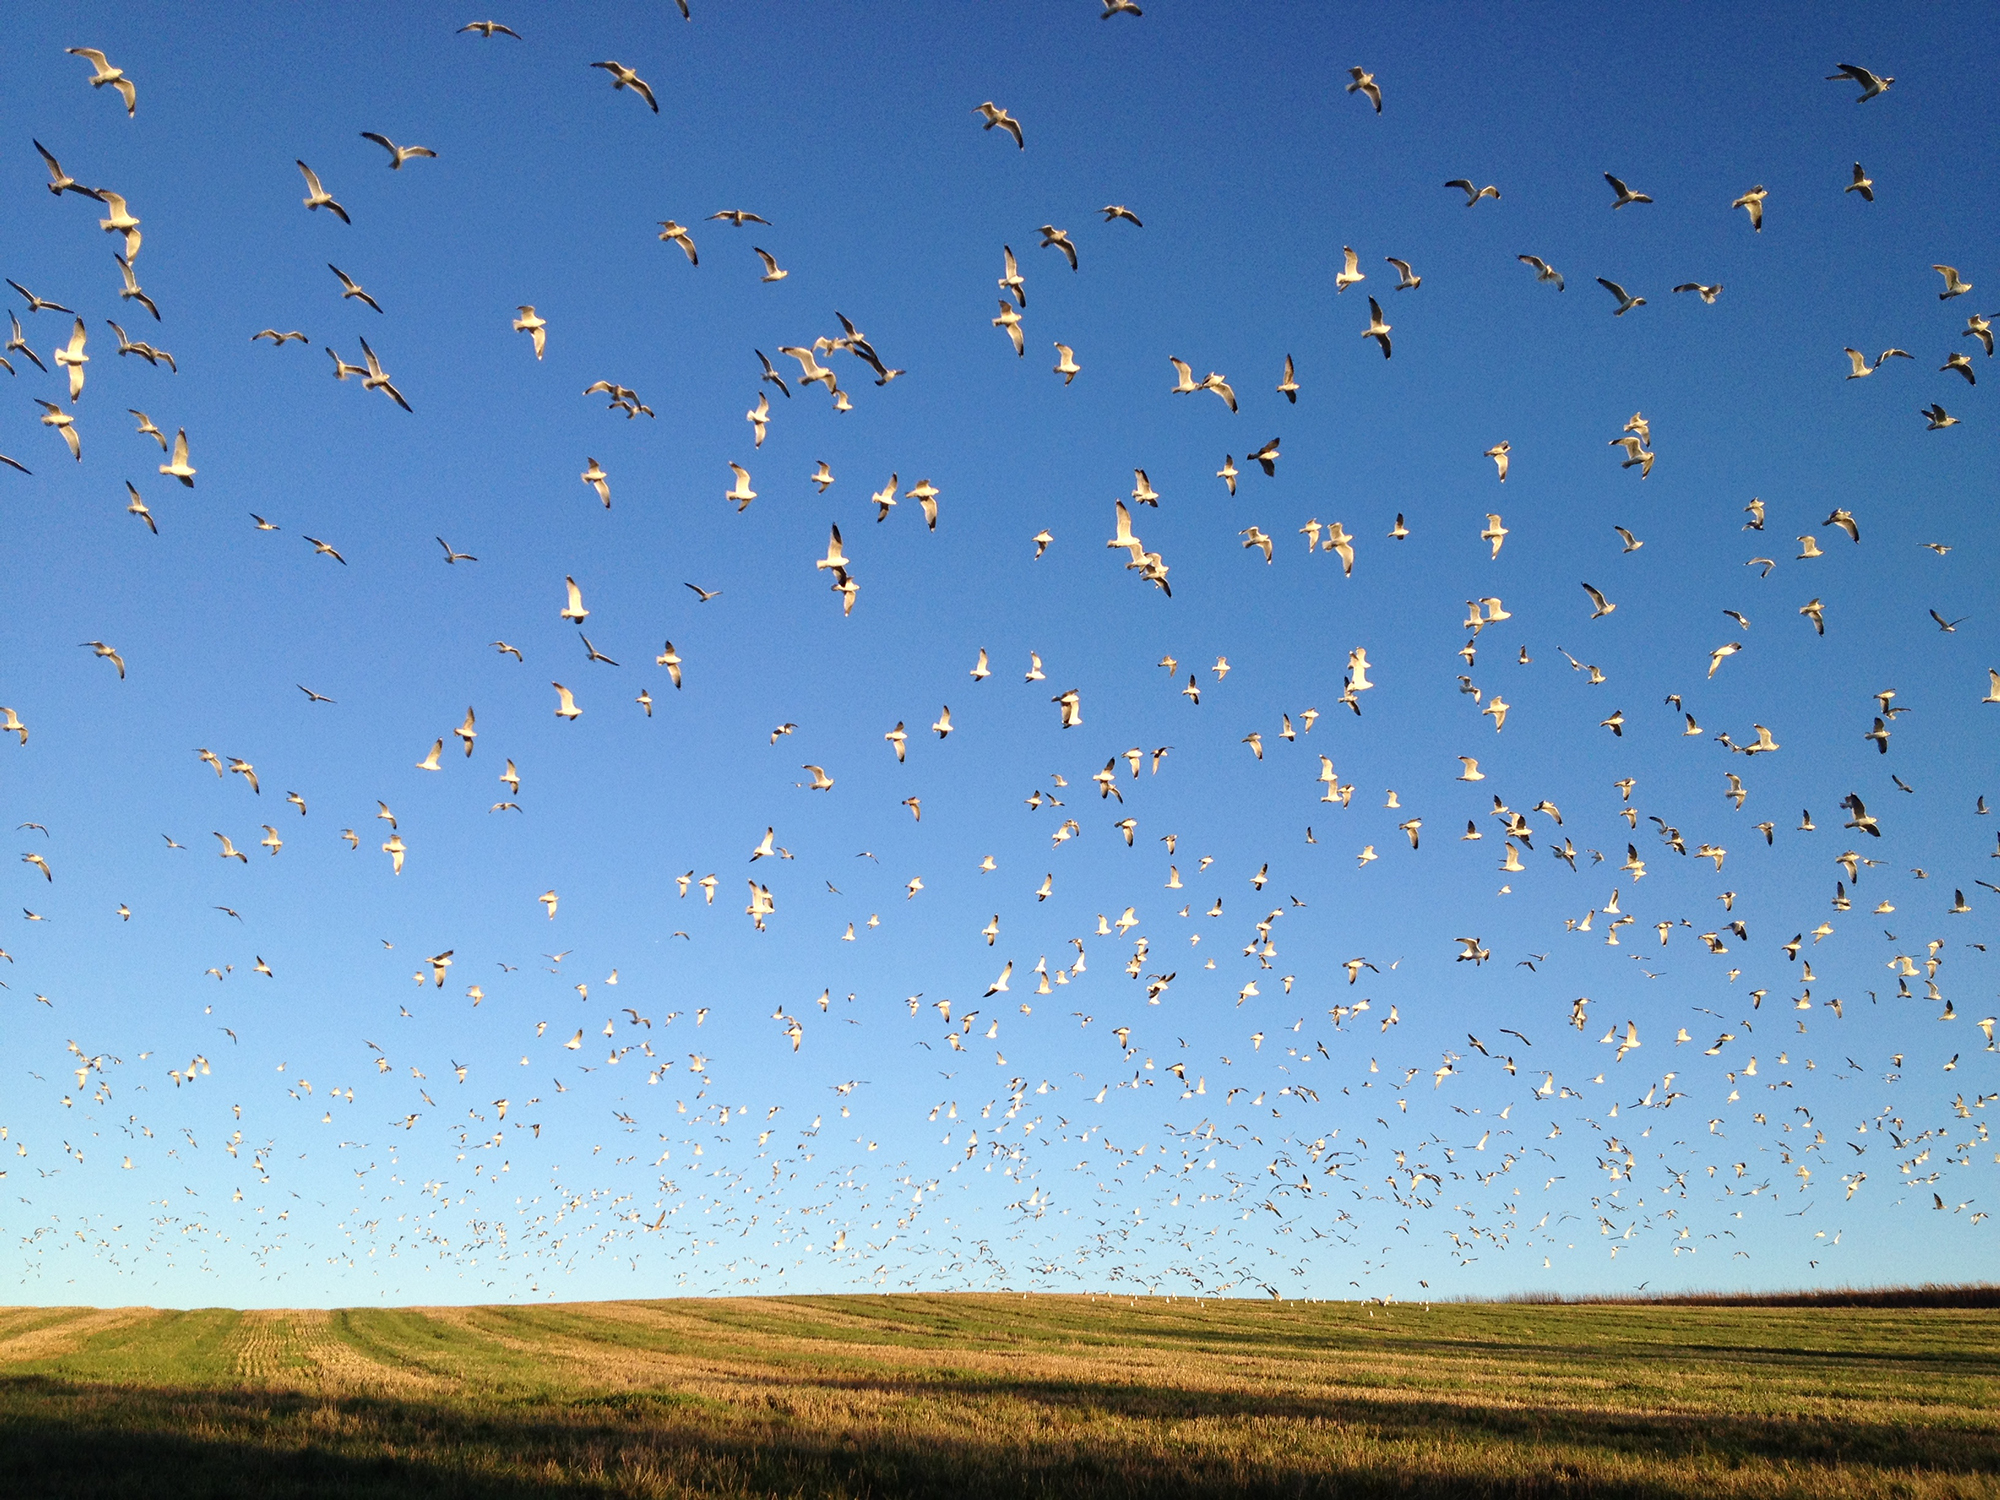 A color photograph of many white birds flying over a yellow field.